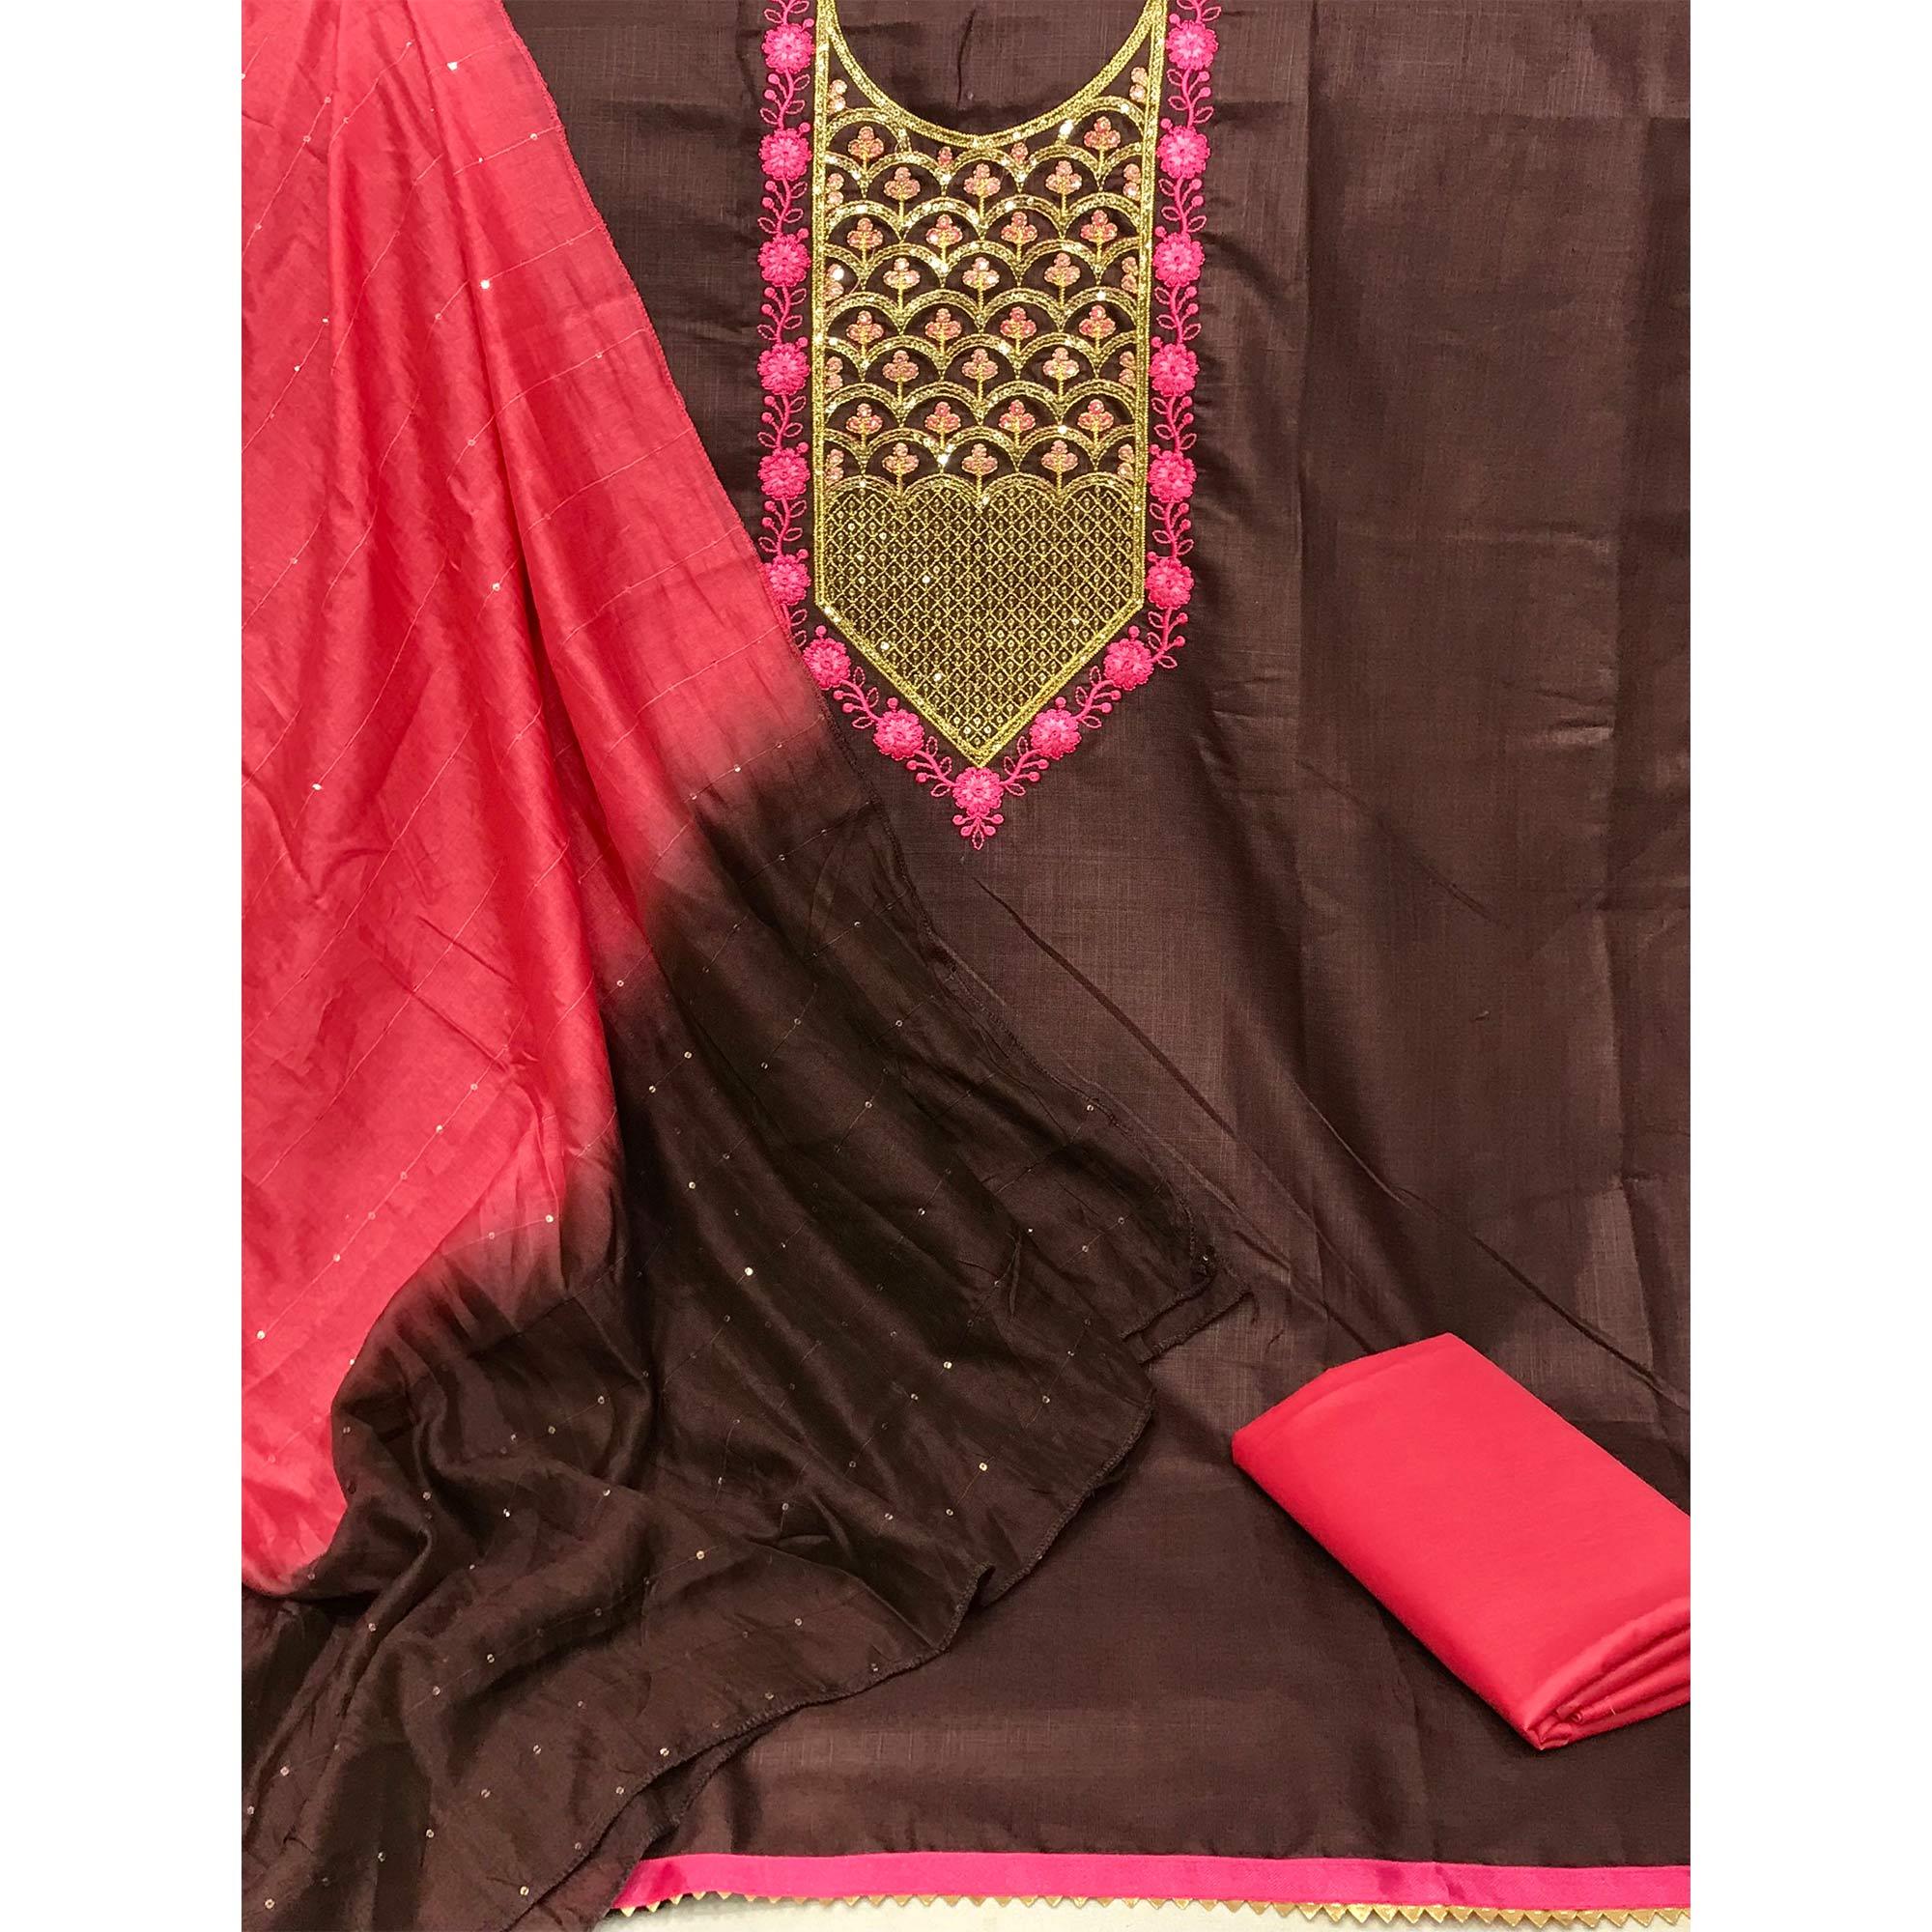 Brown Embroidered With Embellished Poly Cotton Dress Material - Peachmode